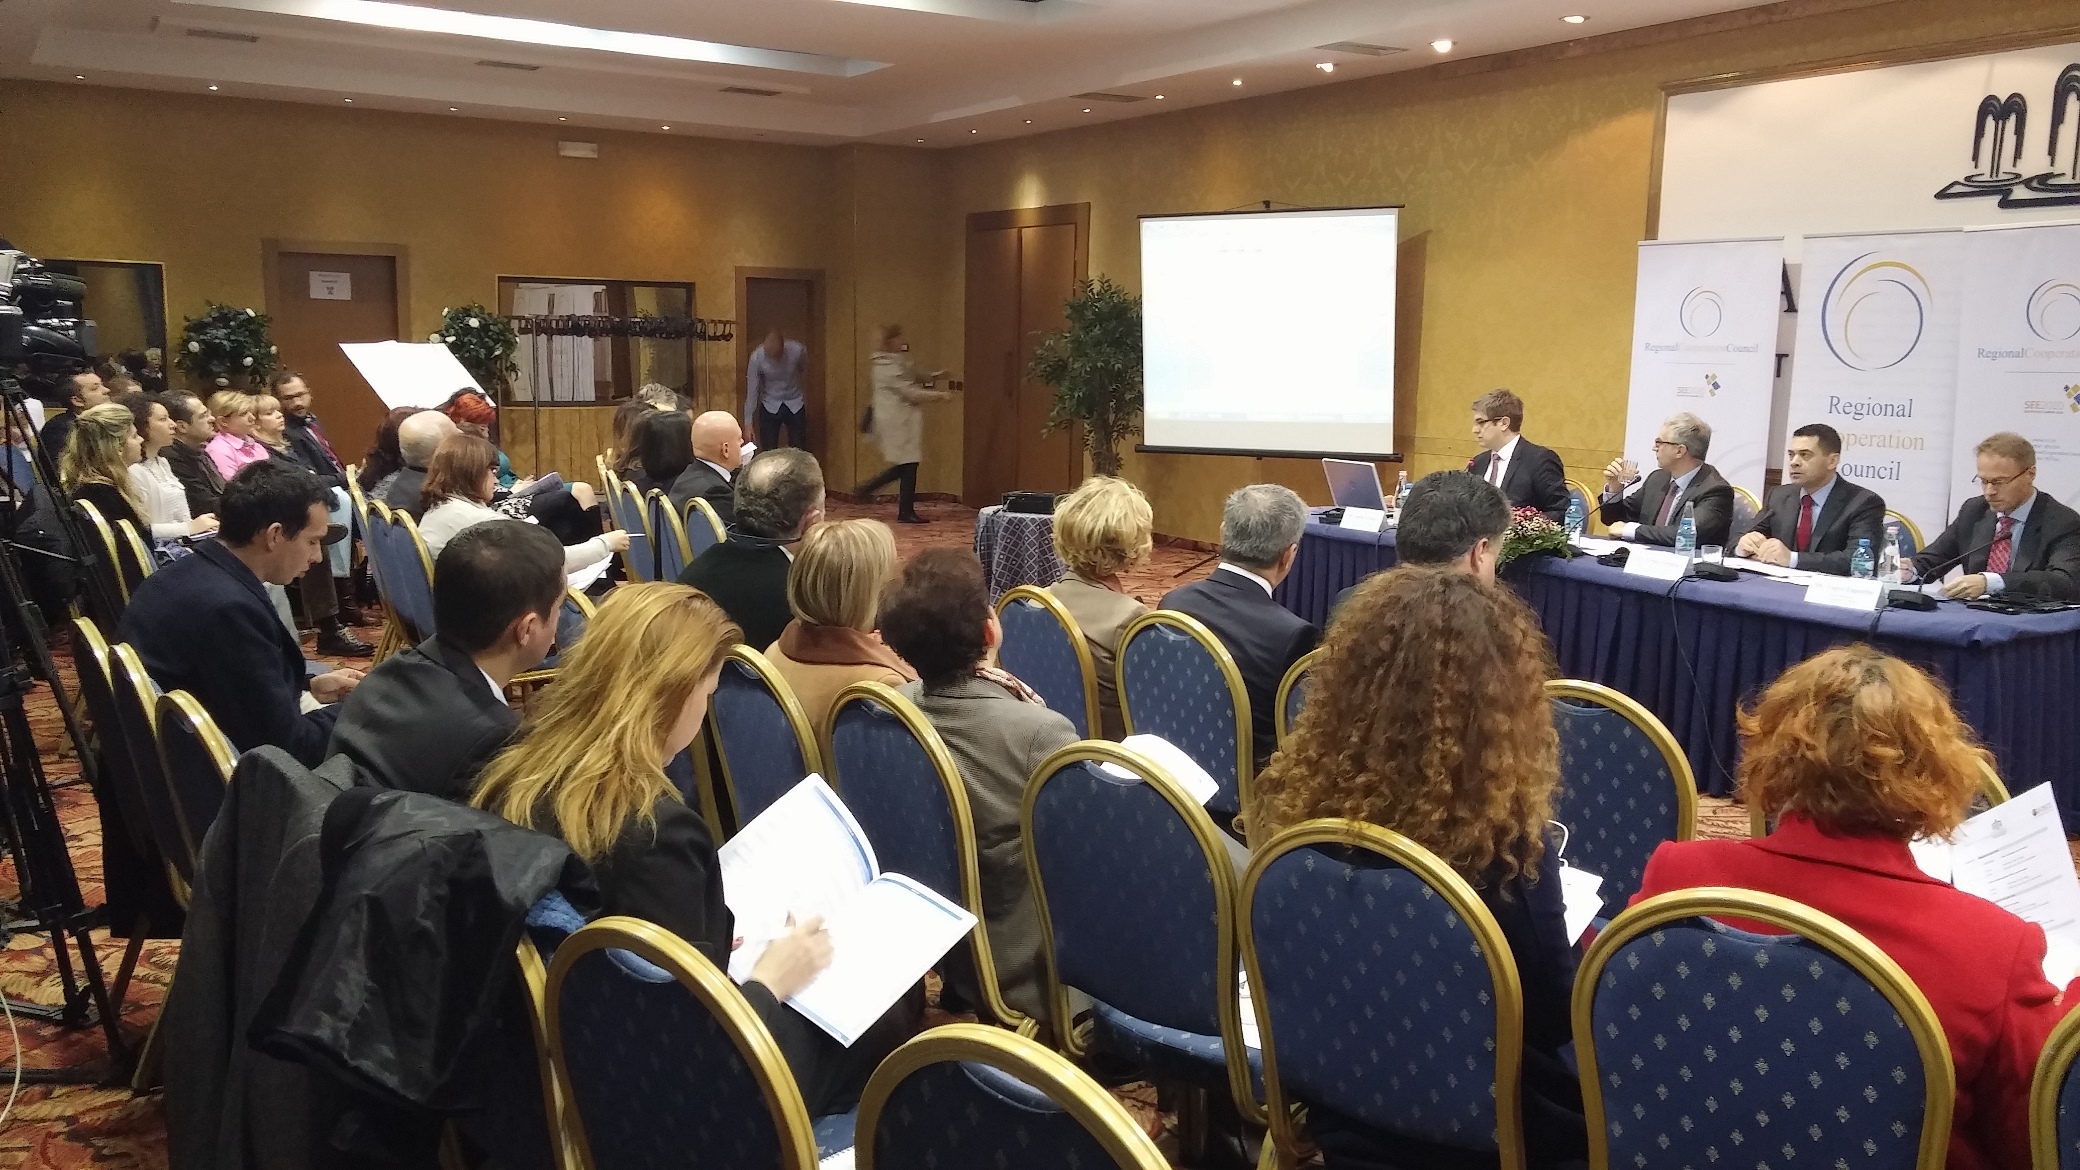 Conference dedicated to the monitoring and implementation of RCC’s SEE 2020 strategy, held in Tirana, Albania, on 9 February 2015. (Photo RCC/Selma Ahatovic-Lihic)